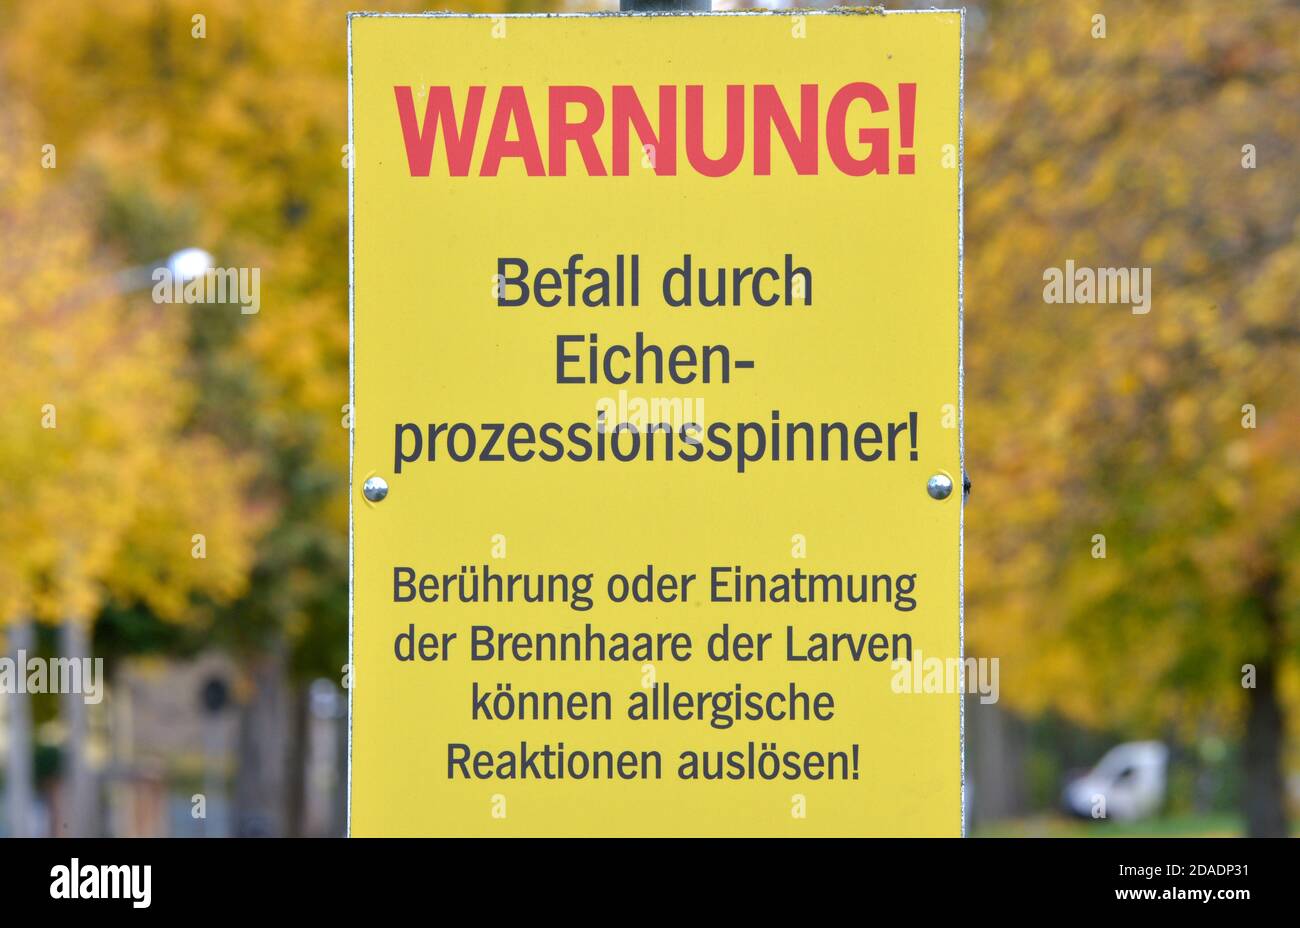 Teltow, Germany. 28th Oct, 2020. Warning! Infestation by oak processional mothers! Touching or inhaling the stinging hairs of the larvae can cause allergic reactions! is written on a sign in a village near Teltow. The insect has caused increasing forest damage in recent years. Credit: Volkmar Heinz/dpa-Zentralbild/ZB/dpa/Alamy Live News Stock Photo